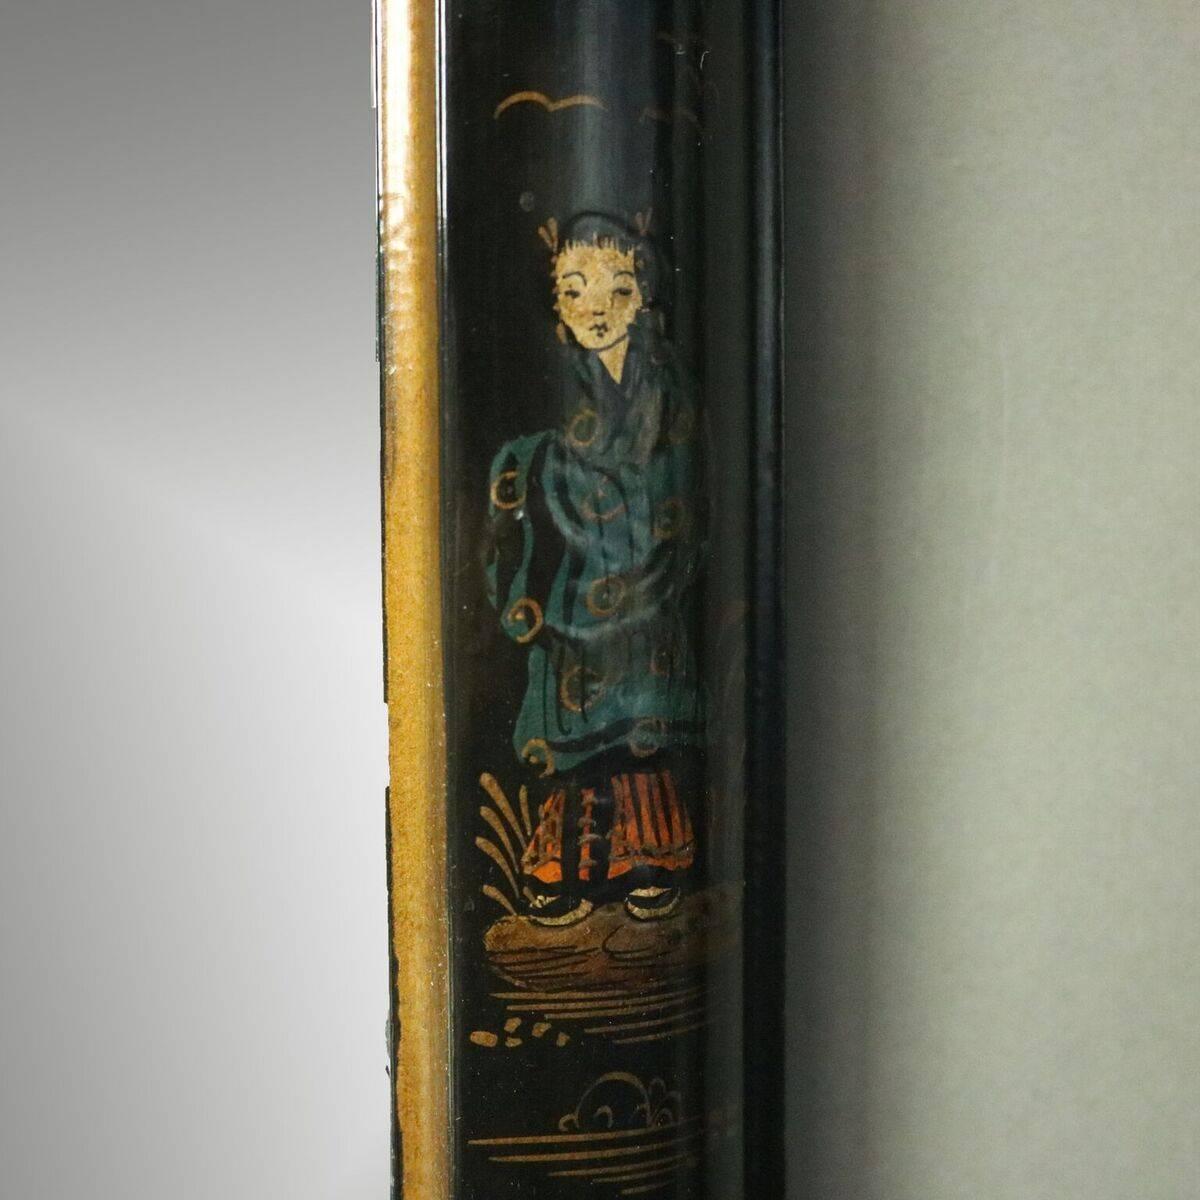 Chinese Vintage Ebonized and Hand-Painted Chinoiserie Decorated Wall Mirror, circa 1930